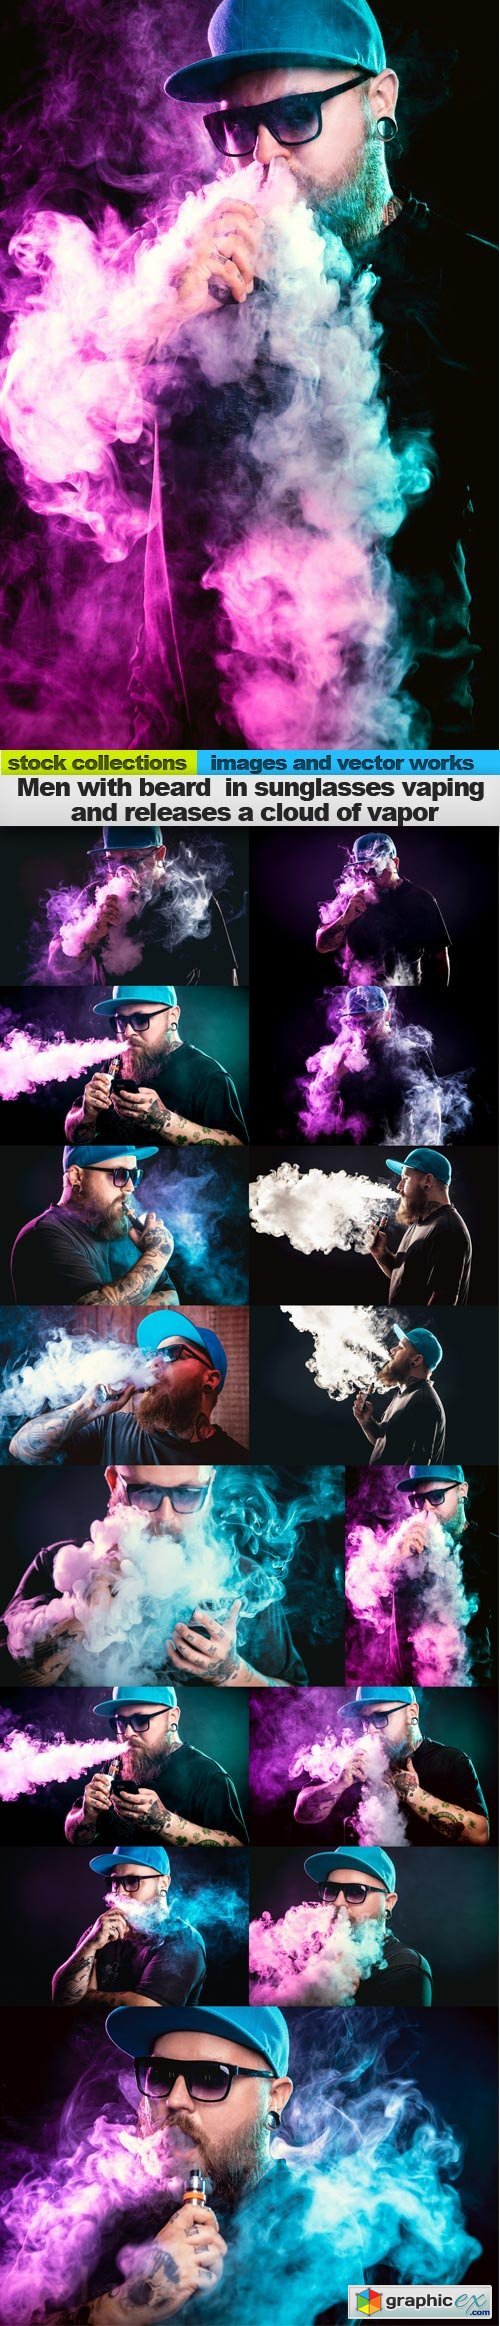 Men with beard in sunglasses vaping and releases a cloud of vapor, 15 x UHQ JPEG